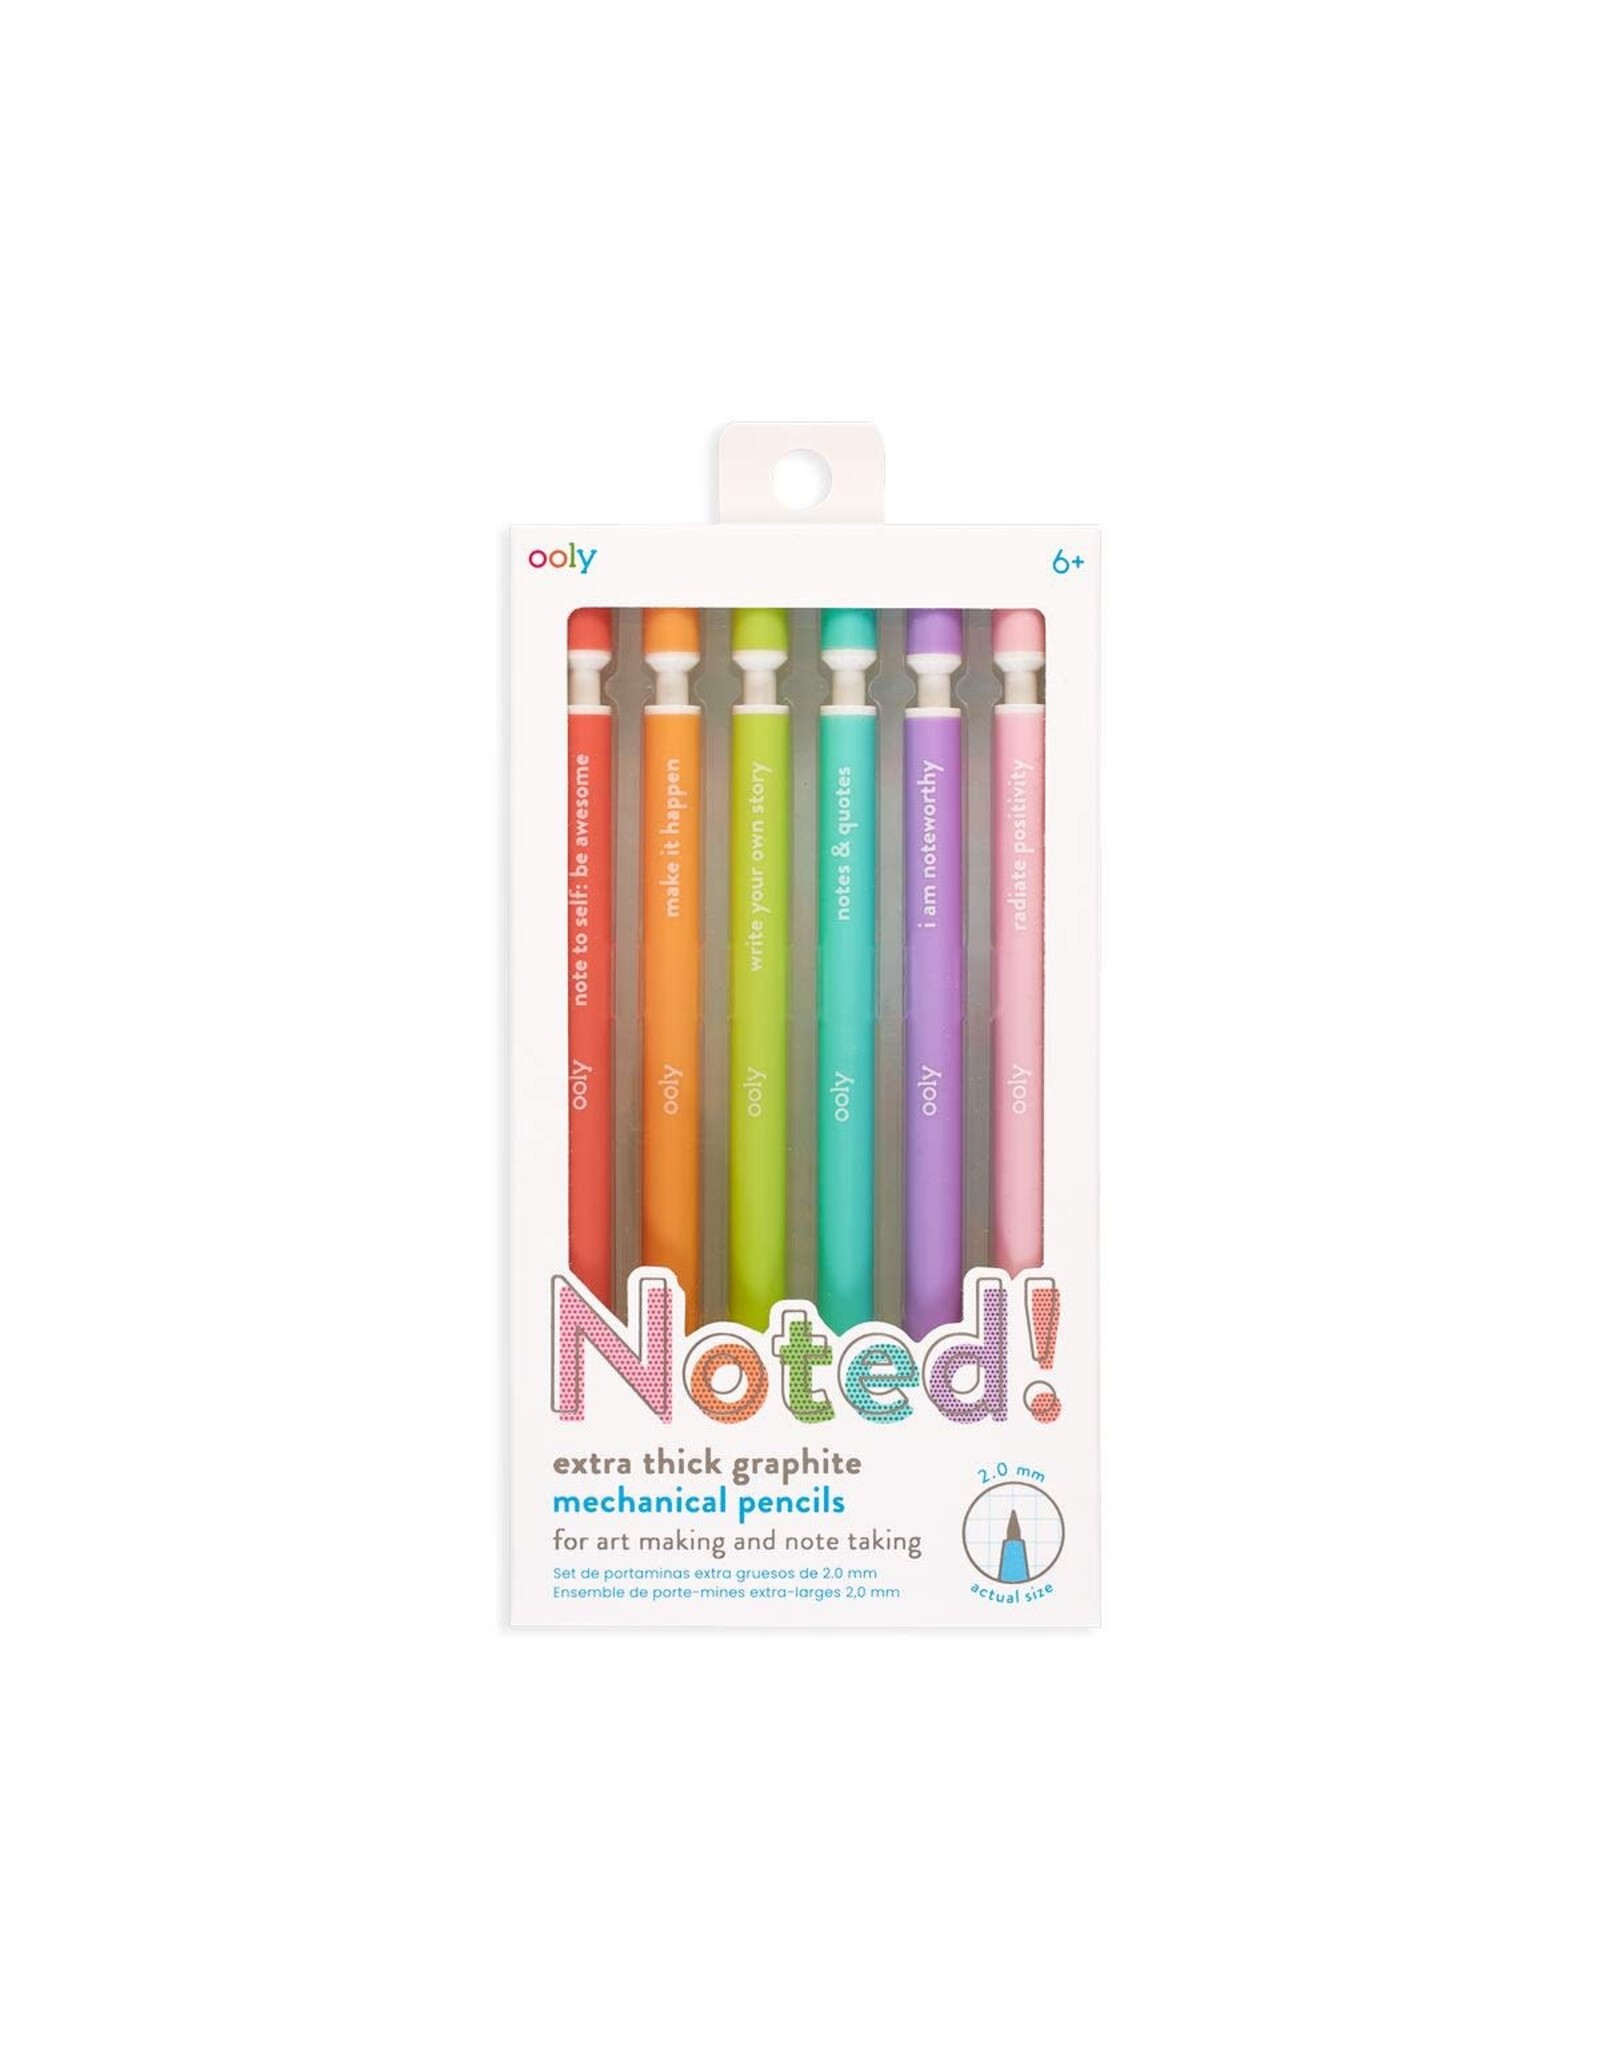 Ooly Noted! Graphite Mechanical Pencils - Set of 6